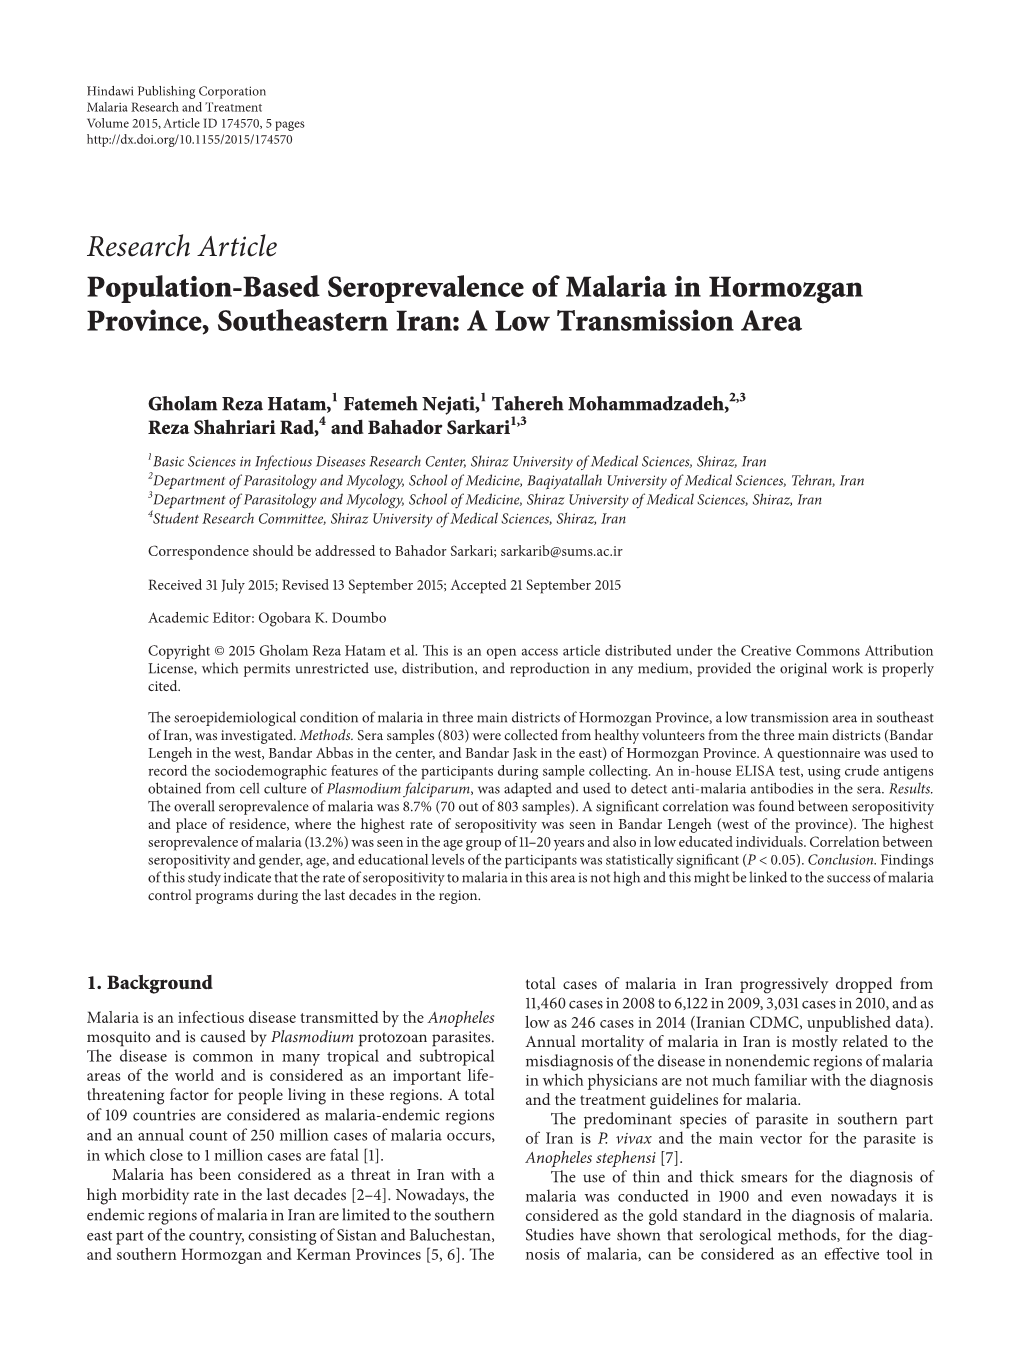 Population-Based Seroprevalence of Malaria in Hormozgan Province, Southeastern Iran: a Low Transmission Area